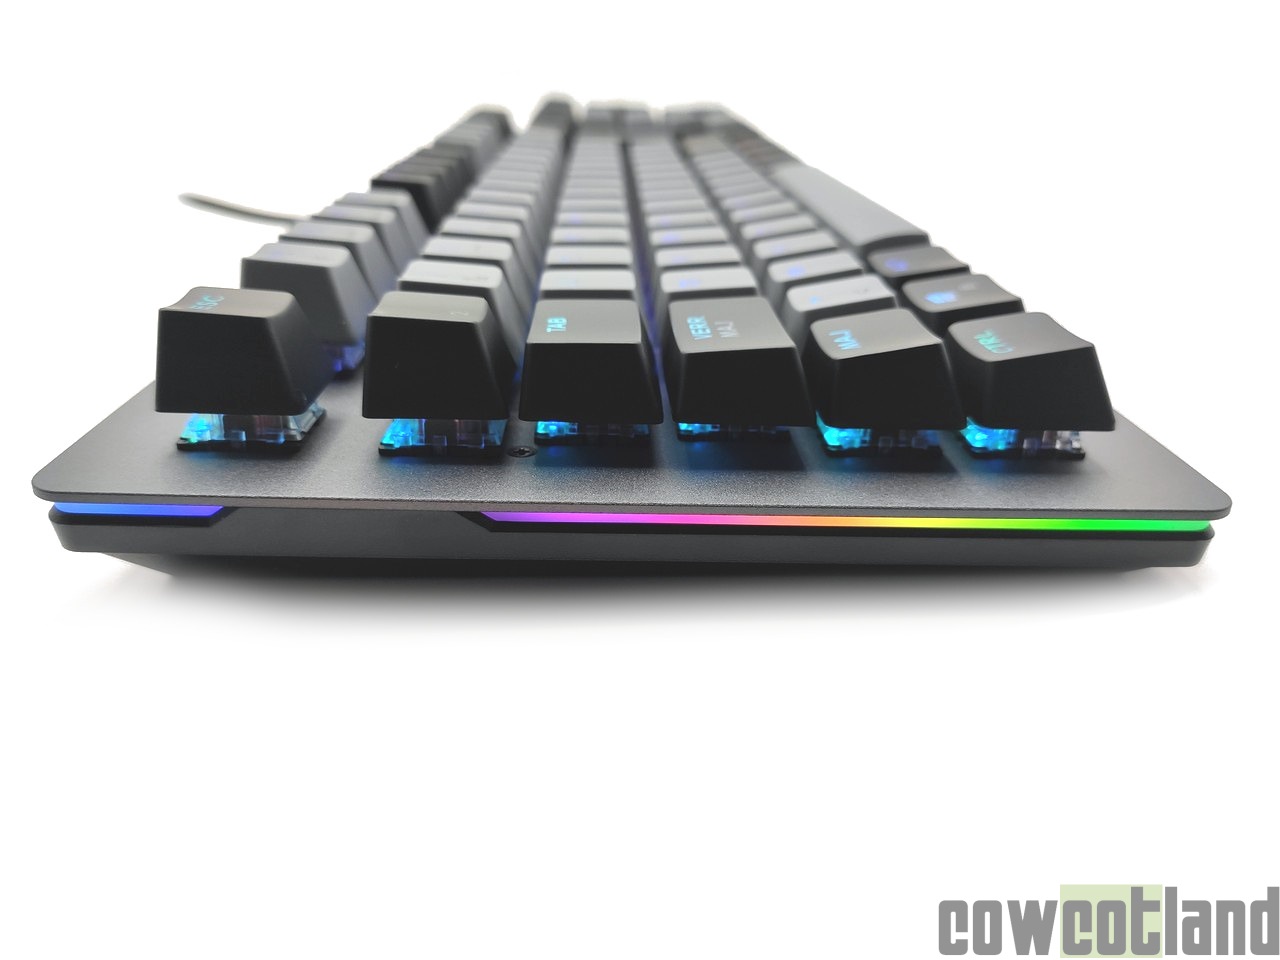 Image 46793, galerie Test clavier Cooler Master CK352 : un clavier plug-and-play  switchs optiques